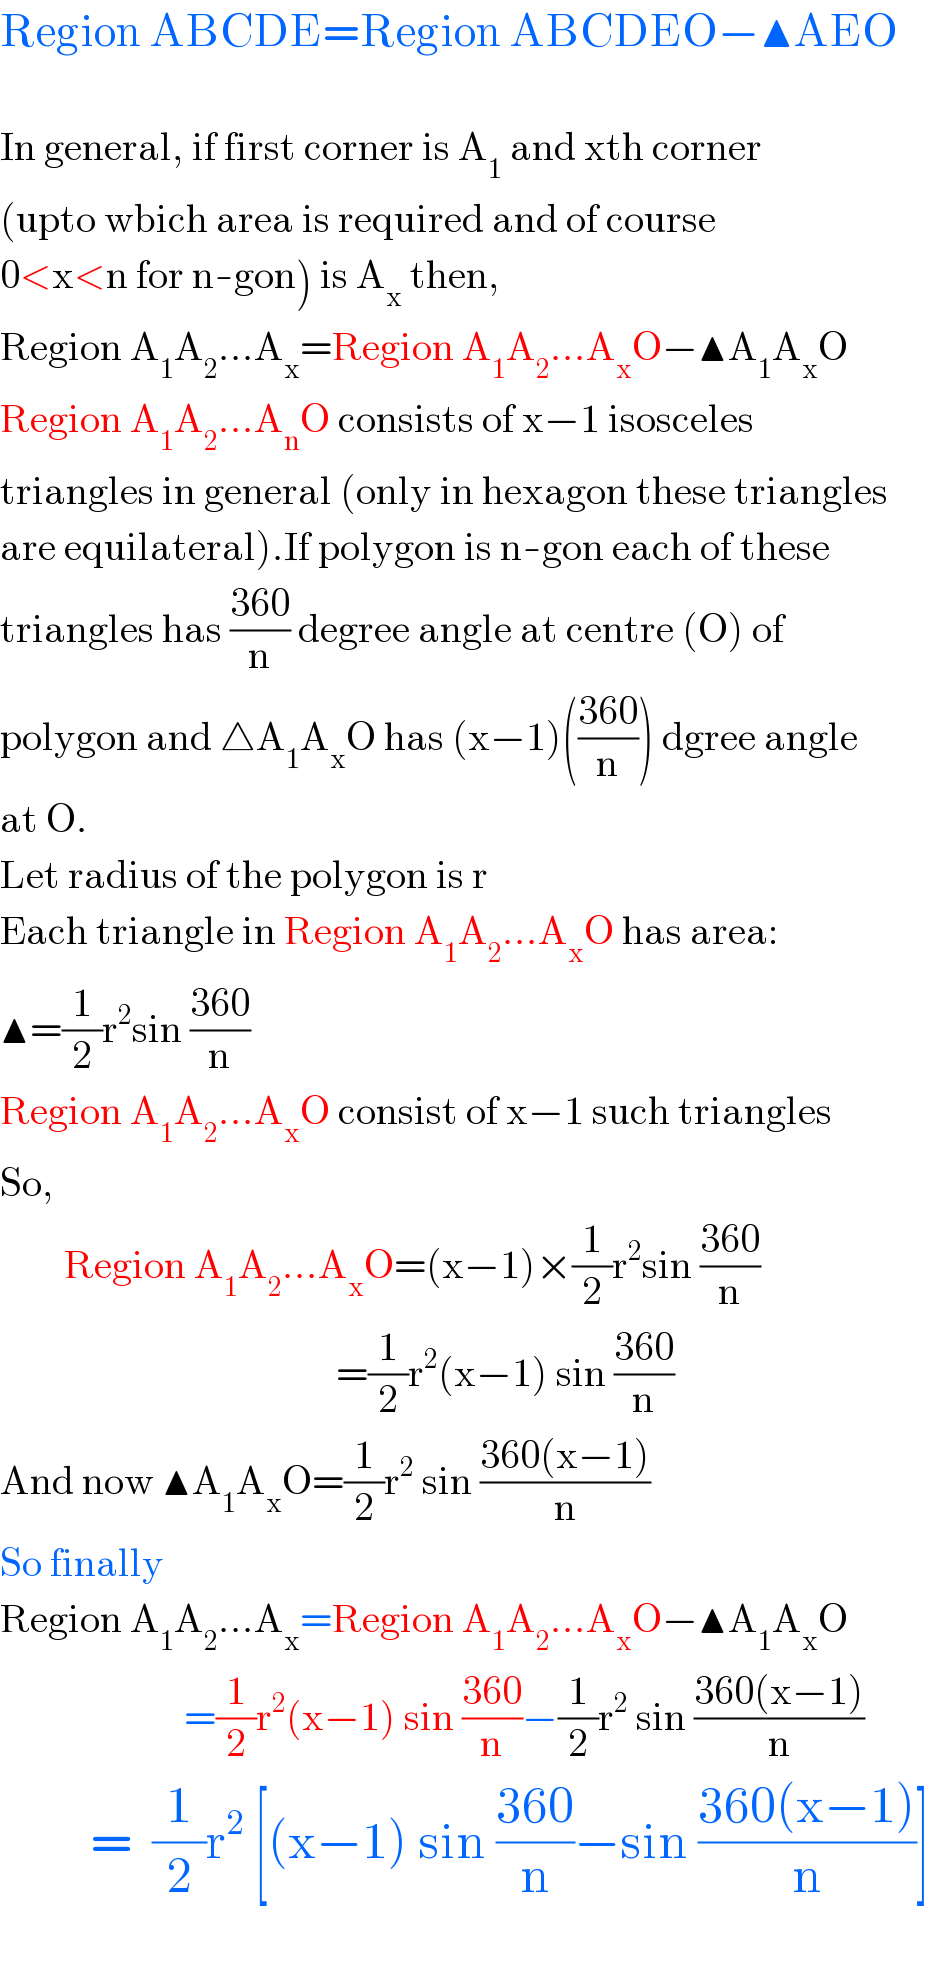 Region ABCDE=Region ABCDEO−▲AEO    In general, if first corner is A_1  and xth corner  (upto wbich area is required and of course   0<x<n for n-gon) is A_x  then,  Region A_1 A_2 ...A_x =Region A_1 A_2 ...A_x O−▲A_1 A_x O  Region A_1 A_2 ...A_n O consists of x−1 isosceles  triangles in general (only in hexagon these triangles  are equilateral).If polygon is n-gon each of these  triangles has ((360)/n) degree angle at centre (O) of   polygon and △A_1 A_x O has (x−1)(((360)/n)) dgree angle  at O.  Let radius of the polygon is r  Each triangle in Region A_1 A_2 ...A_x O has area:  ▲=(1/2)r^2 sin ((360)/n)  Region A_1 A_2 ...A_x O consist of x−1 such triangles  So,          Region A_1 A_2 ...A_x O=(x−1)×(1/2)r^2 sin ((360)/n)                                            =(1/2)r^2 (x−1) sin ((360)/n)  And now ▲A_1 A_x O=(1/2)r^2  sin ((360(x−1))/n)  So finally  Region A_1 A_2 ...A_x =Region A_1 A_2 ...A_x O−▲A_1 A_x O                         =(1/2)r^2 (x−1) sin ((360)/n)−(1/2)r^2  sin ((360(x−1))/n)           =  (1/2)r^2  [(x−1) sin ((360)/n)−sin ((360(x−1))/n)]    